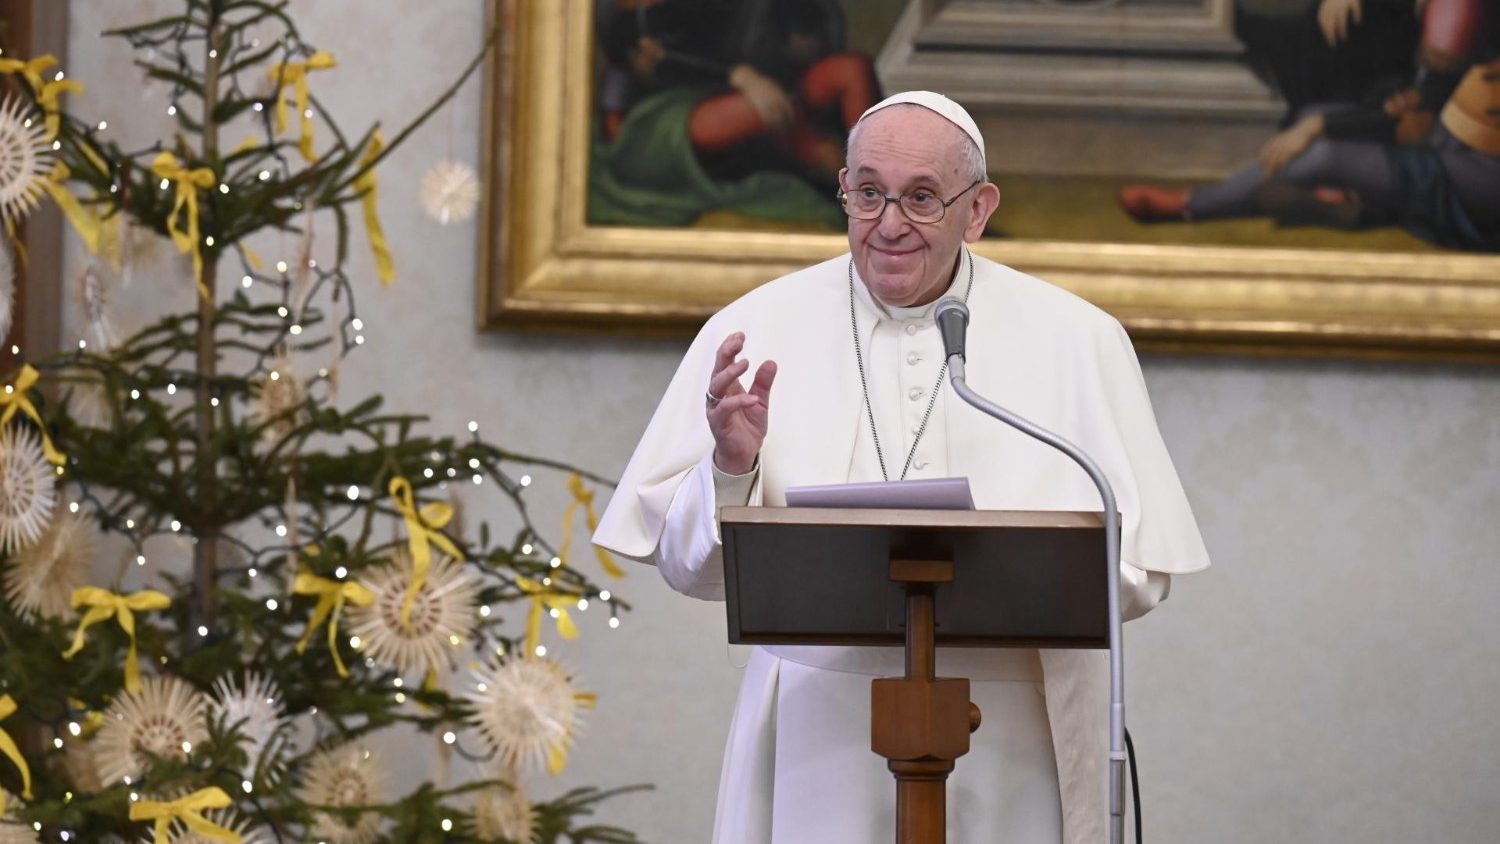 Pope at Angelus reminds us to value our baptismal identity